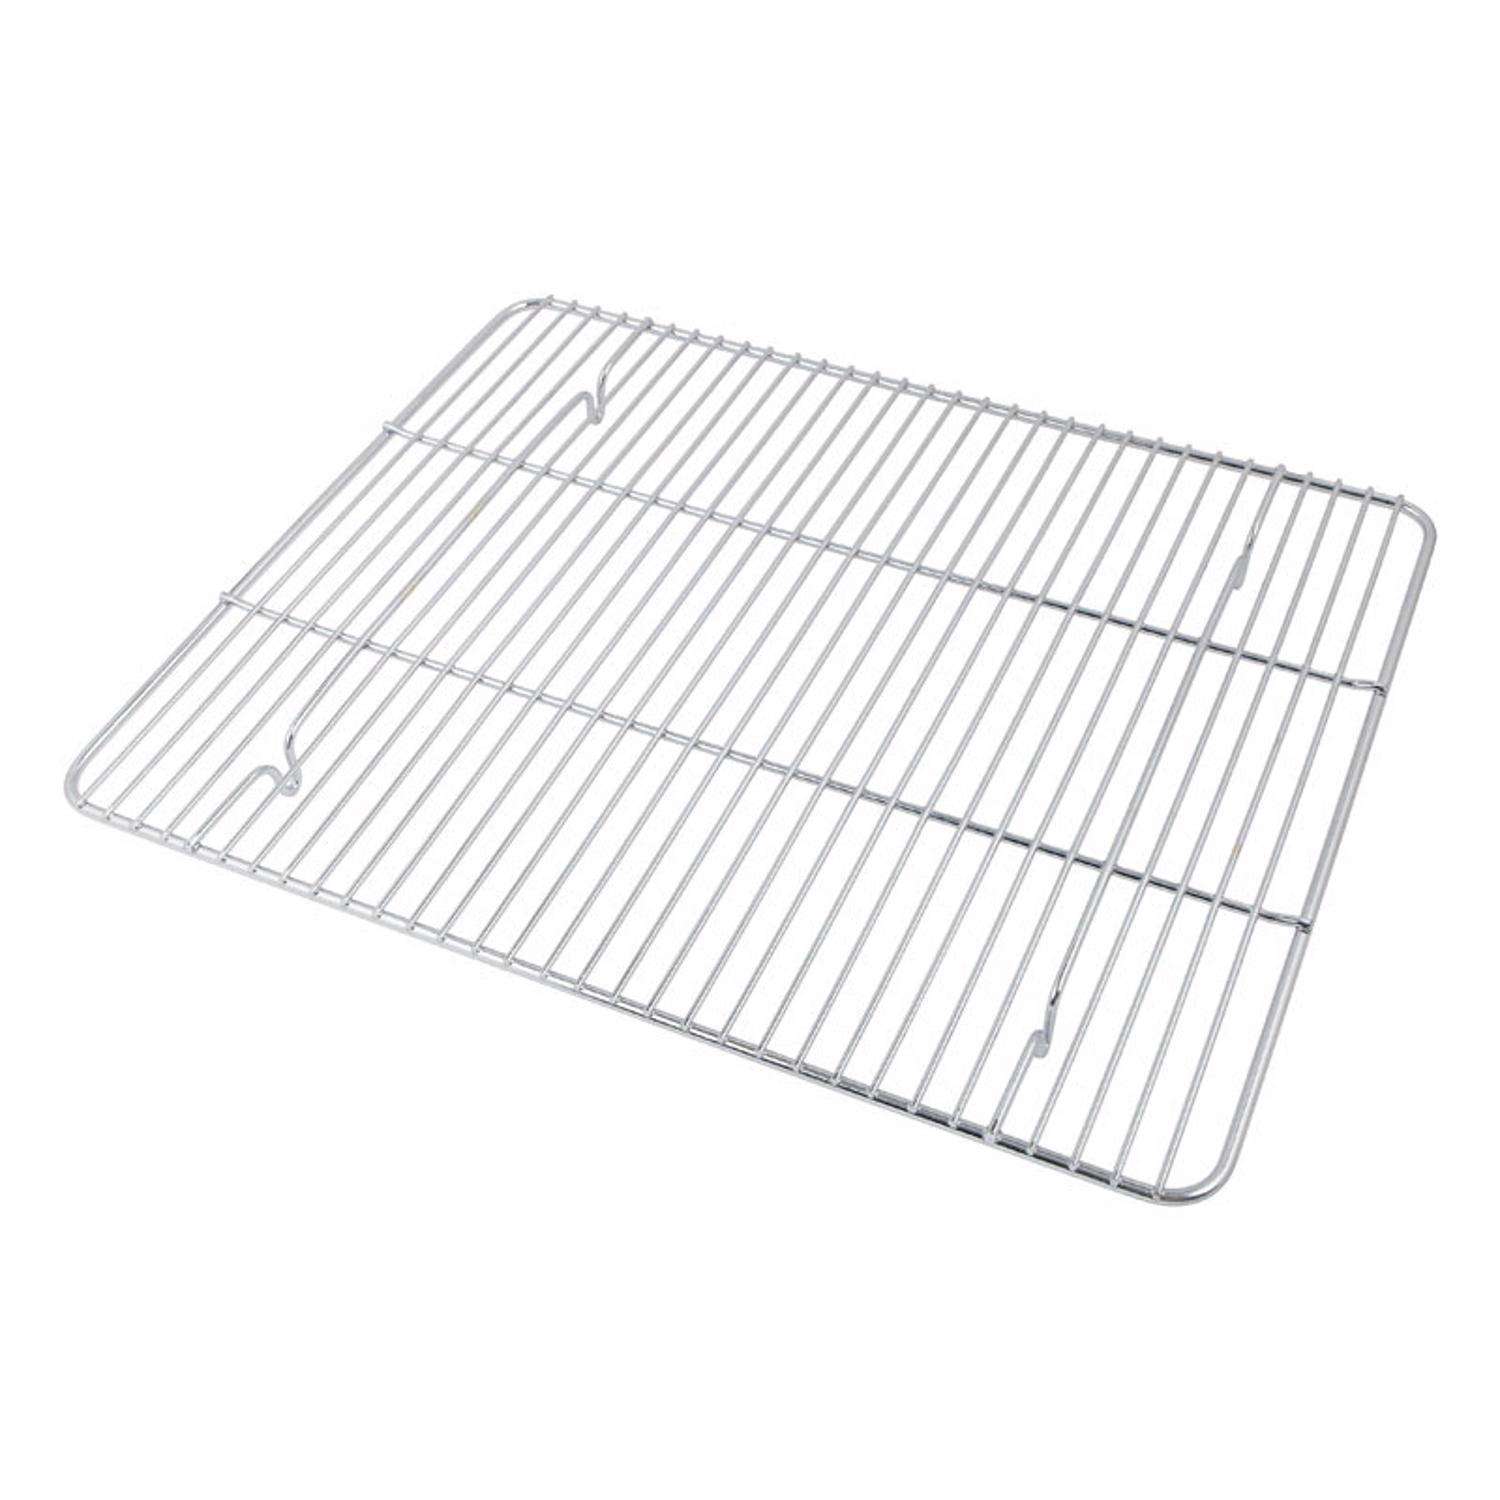 Cooling & Cooking Rack - 100% Stainless Steel rack, 12 x 17